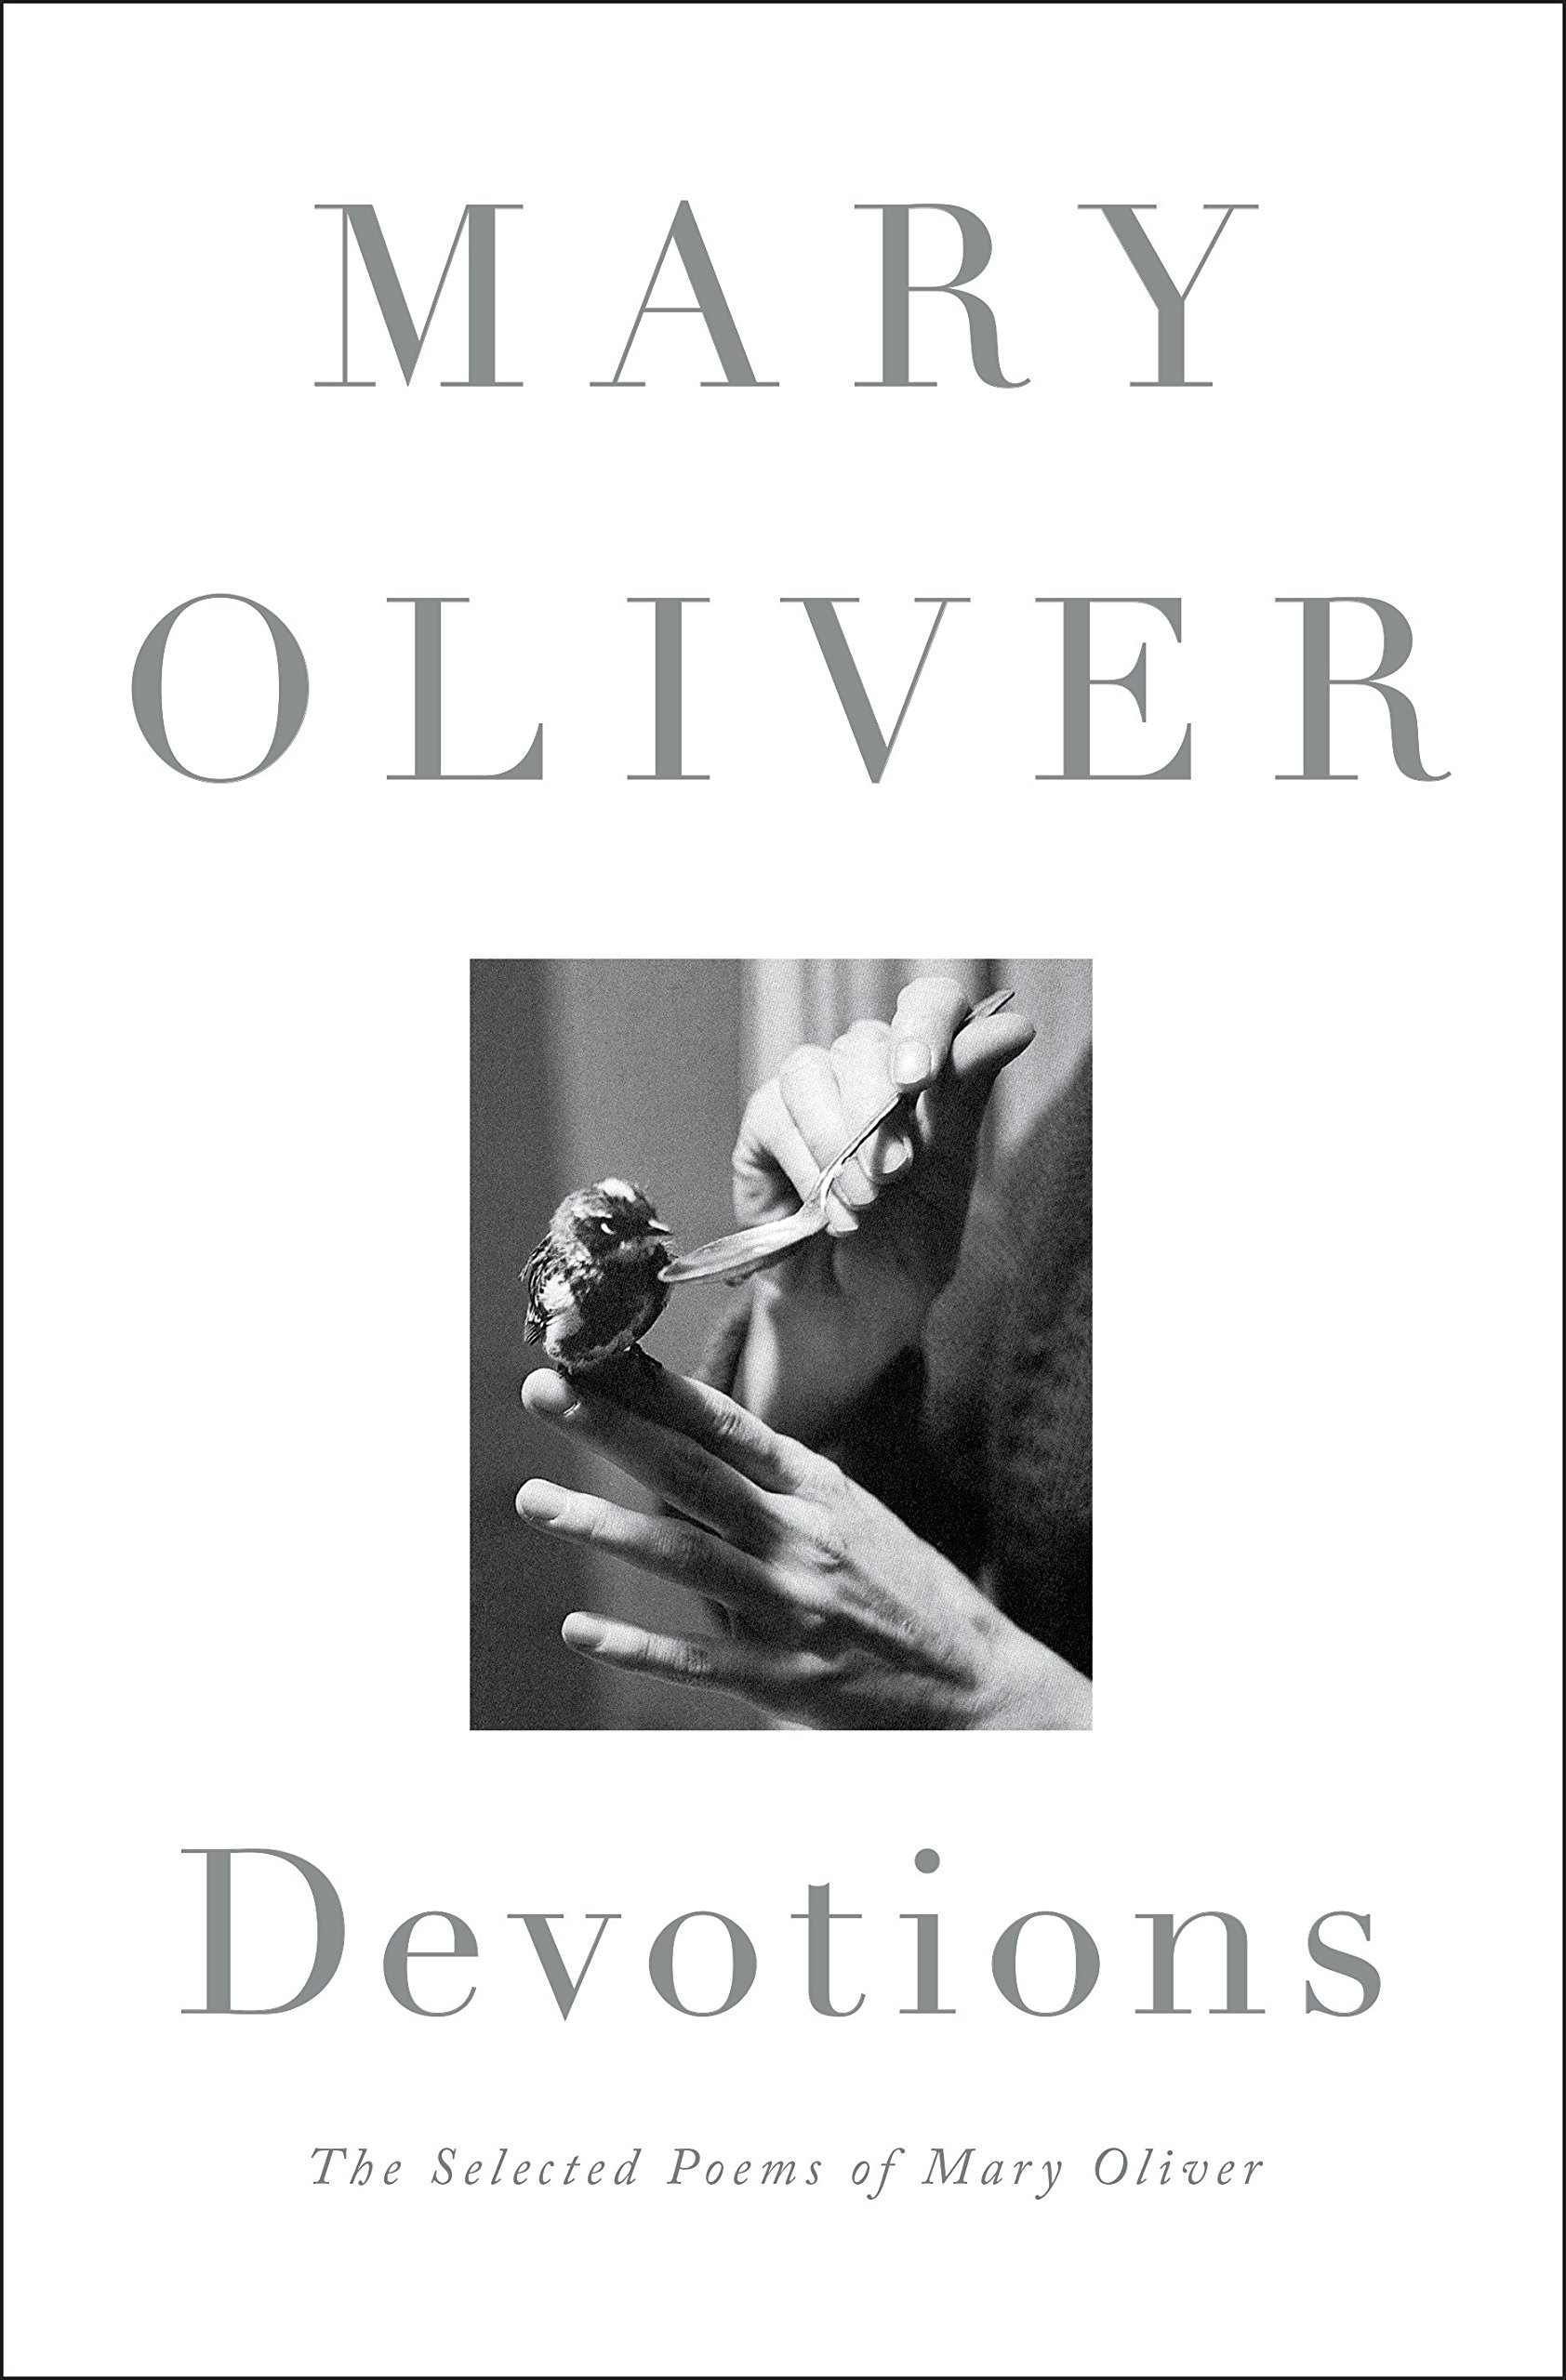 Devotions The Selected Poems of Mary Oliver PDF